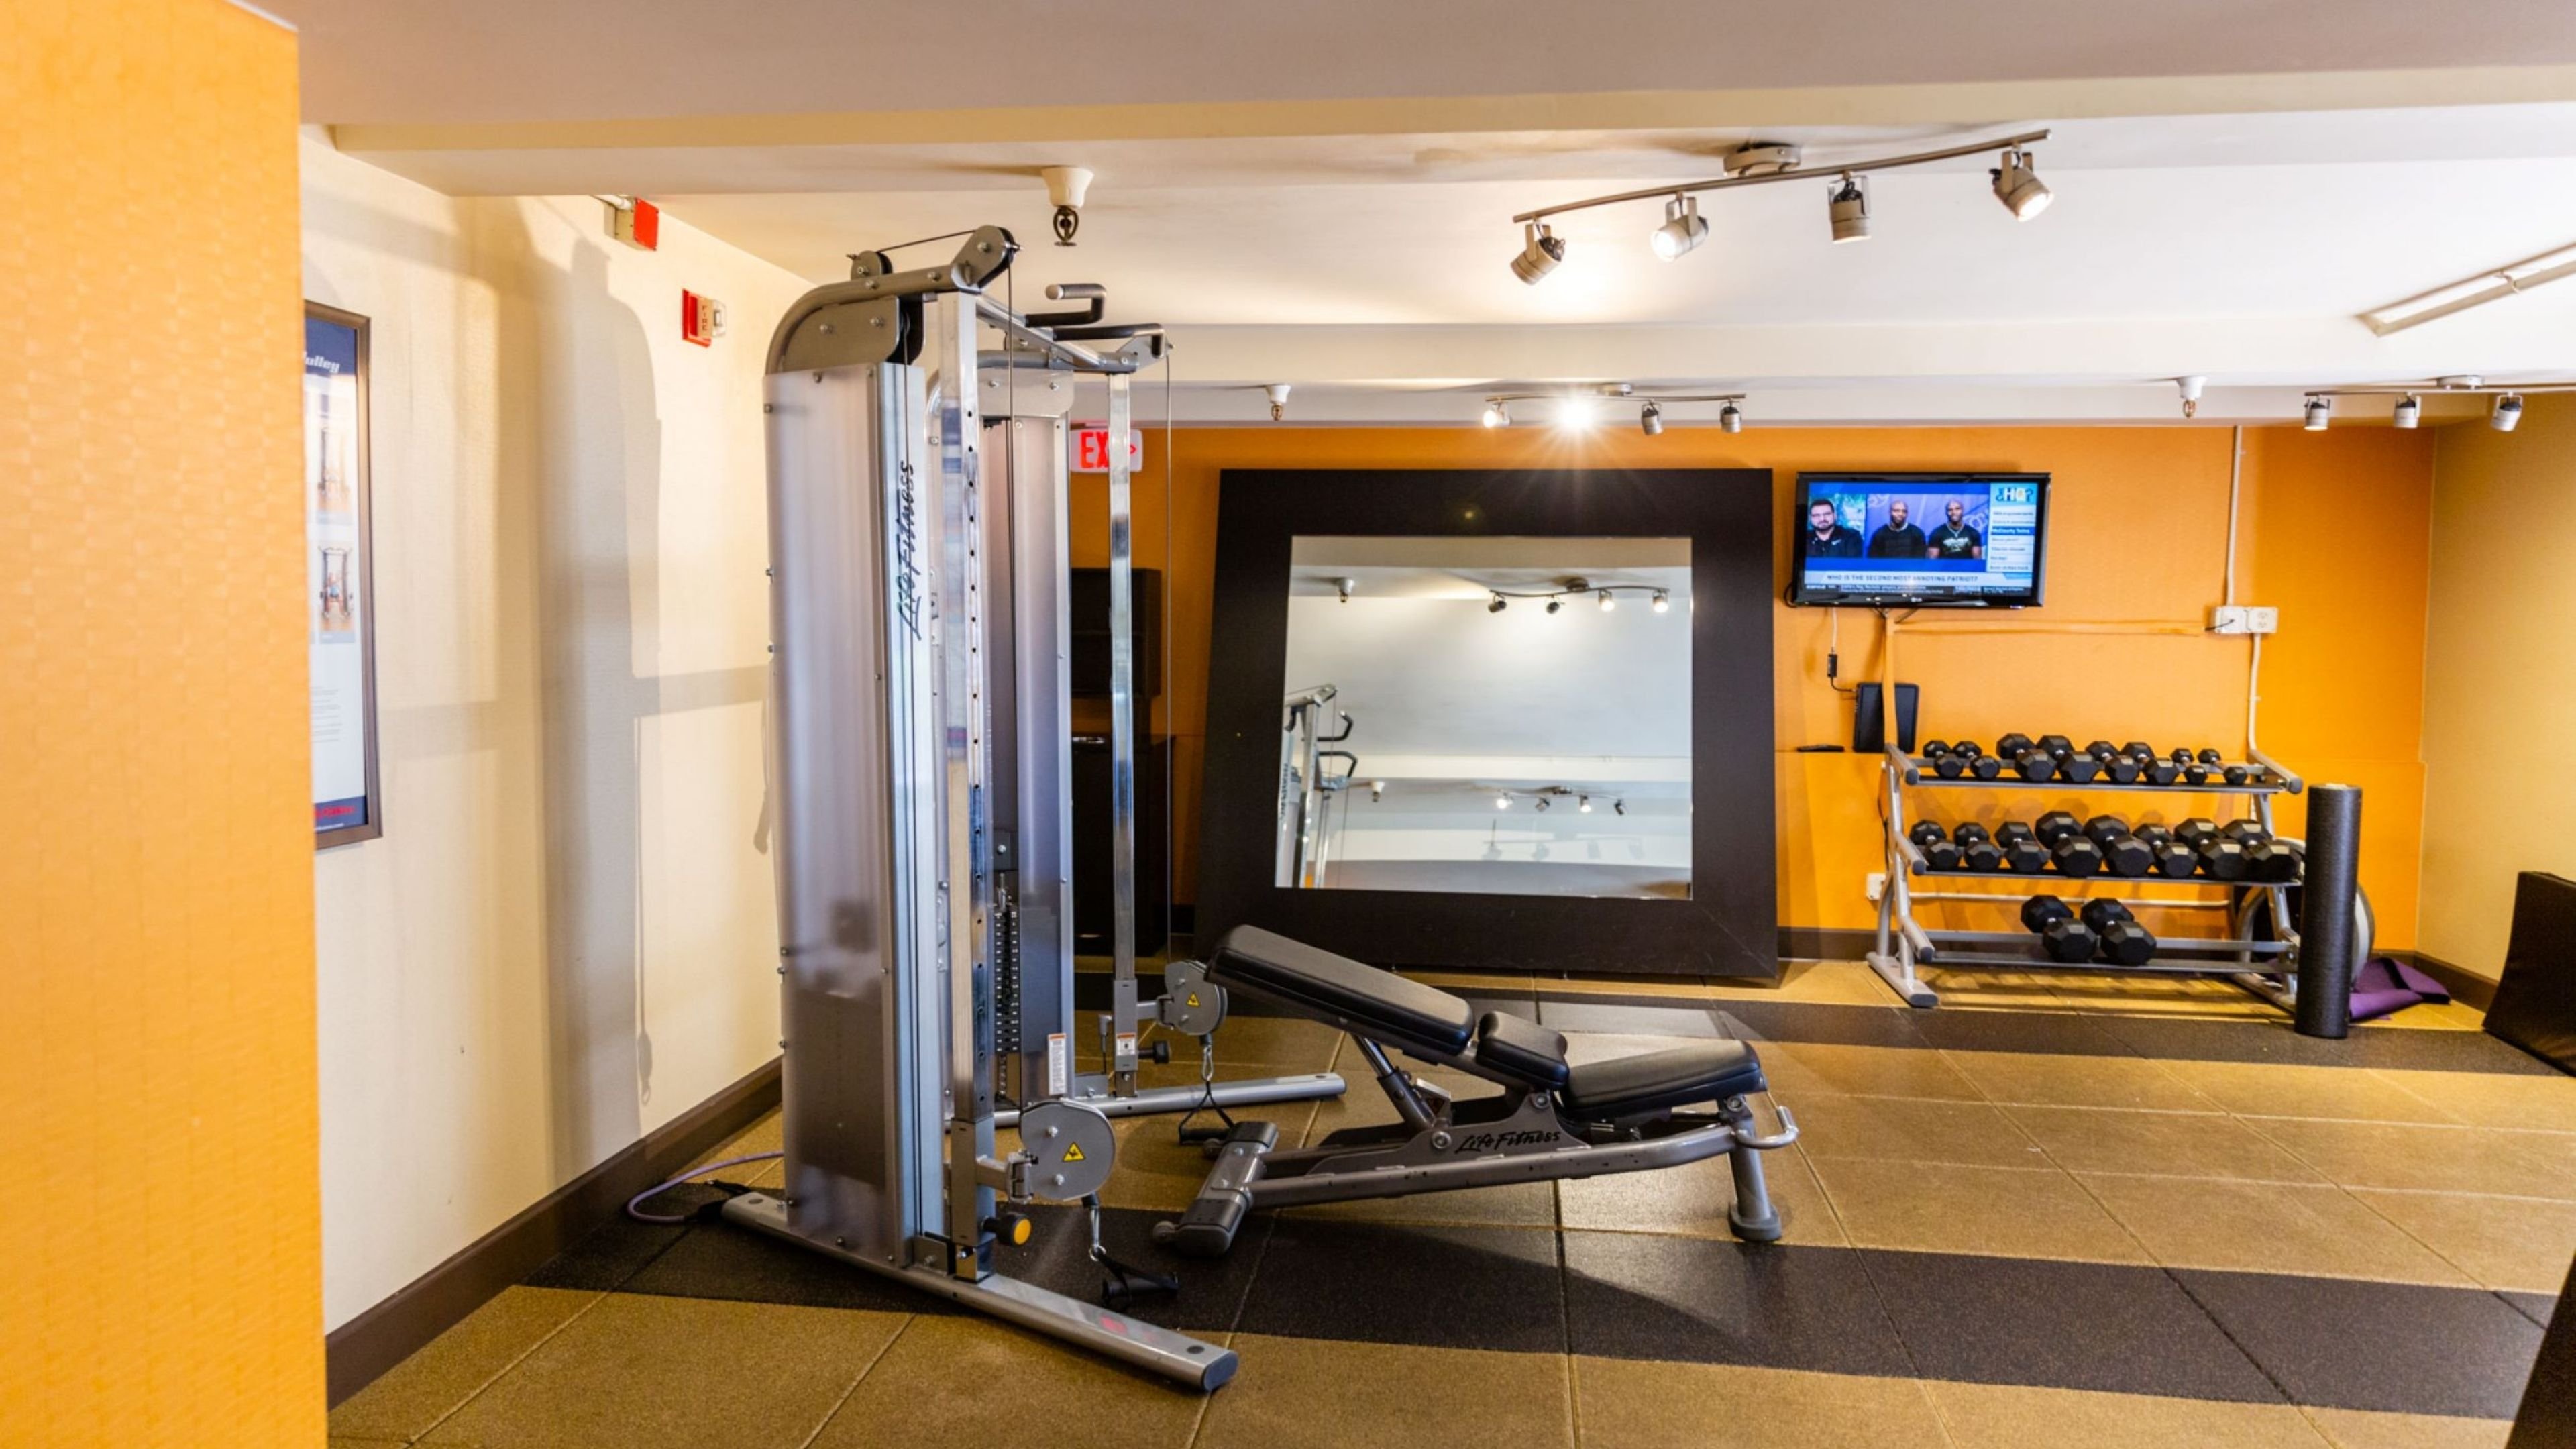 Our updated fitness center is large and spacious.